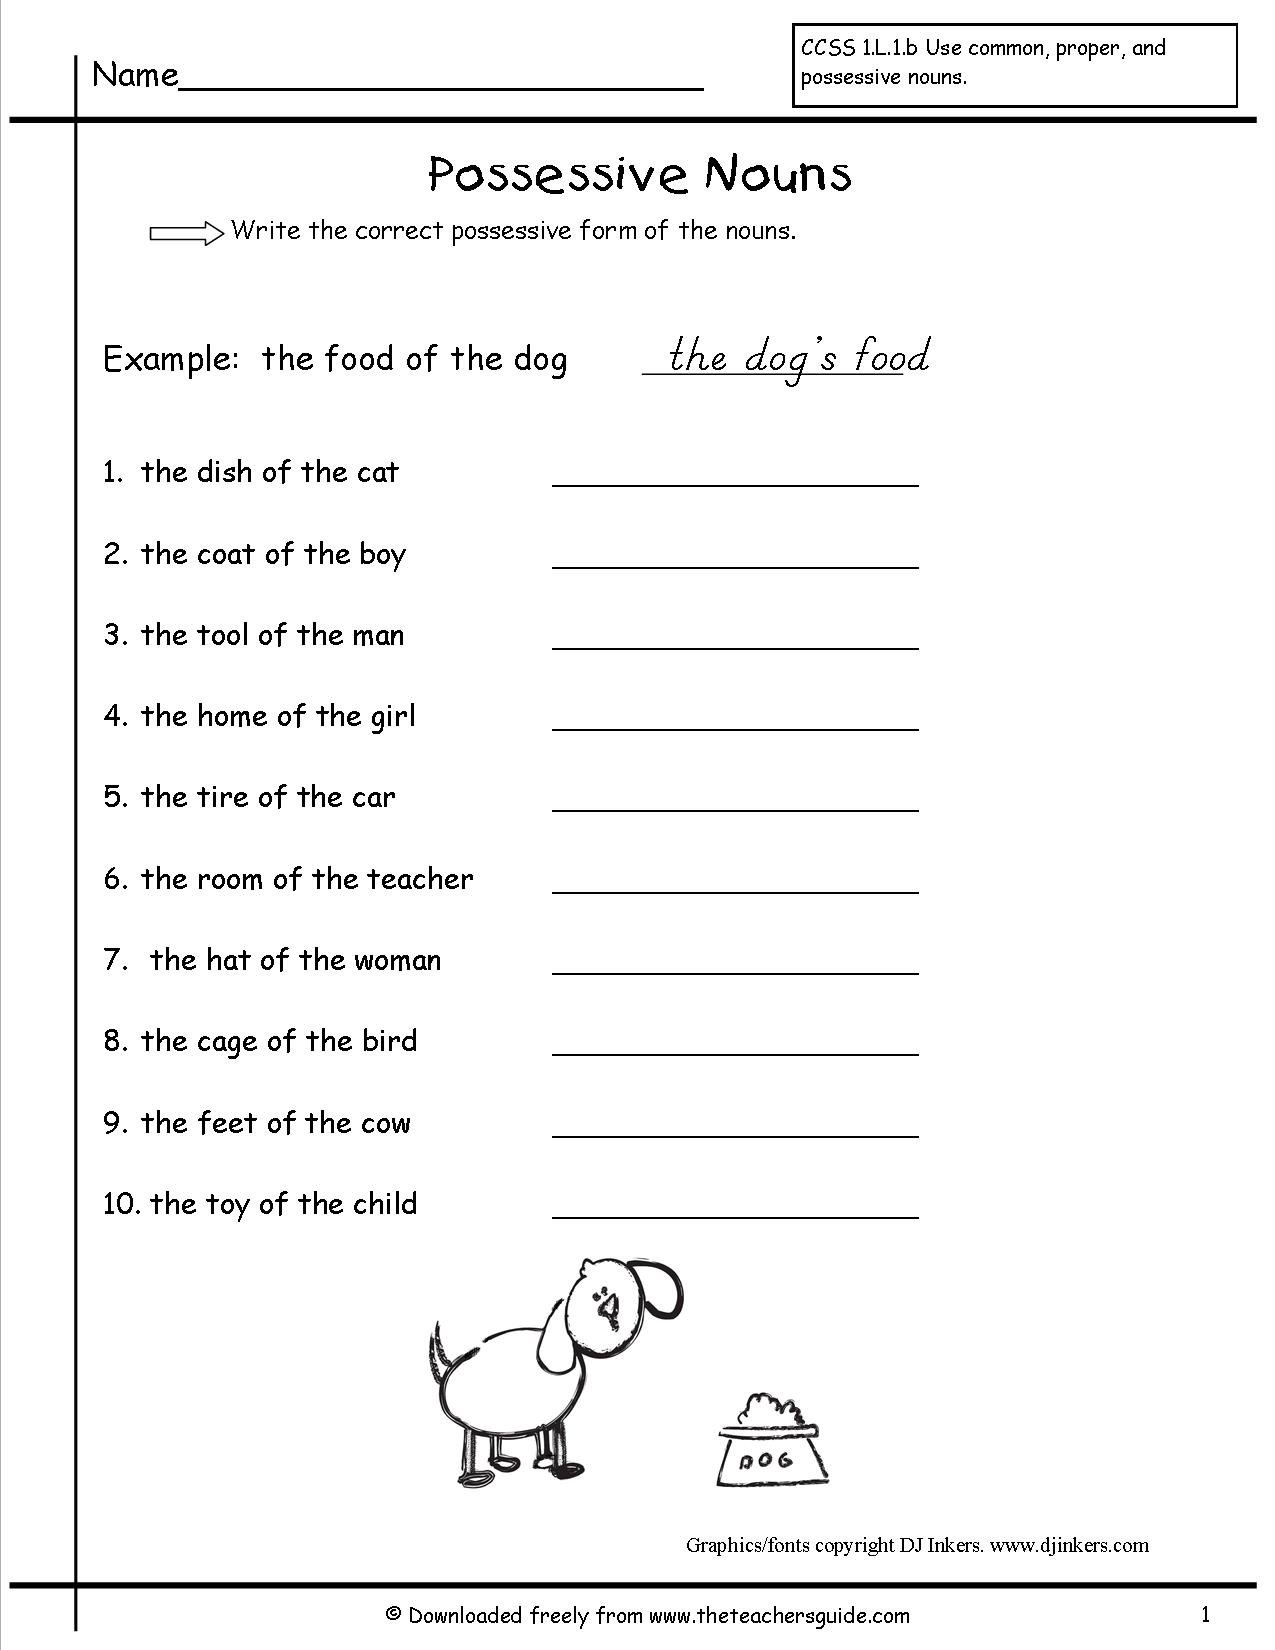 13-best-images-of-free-printable-worksheets-possessive-nouns